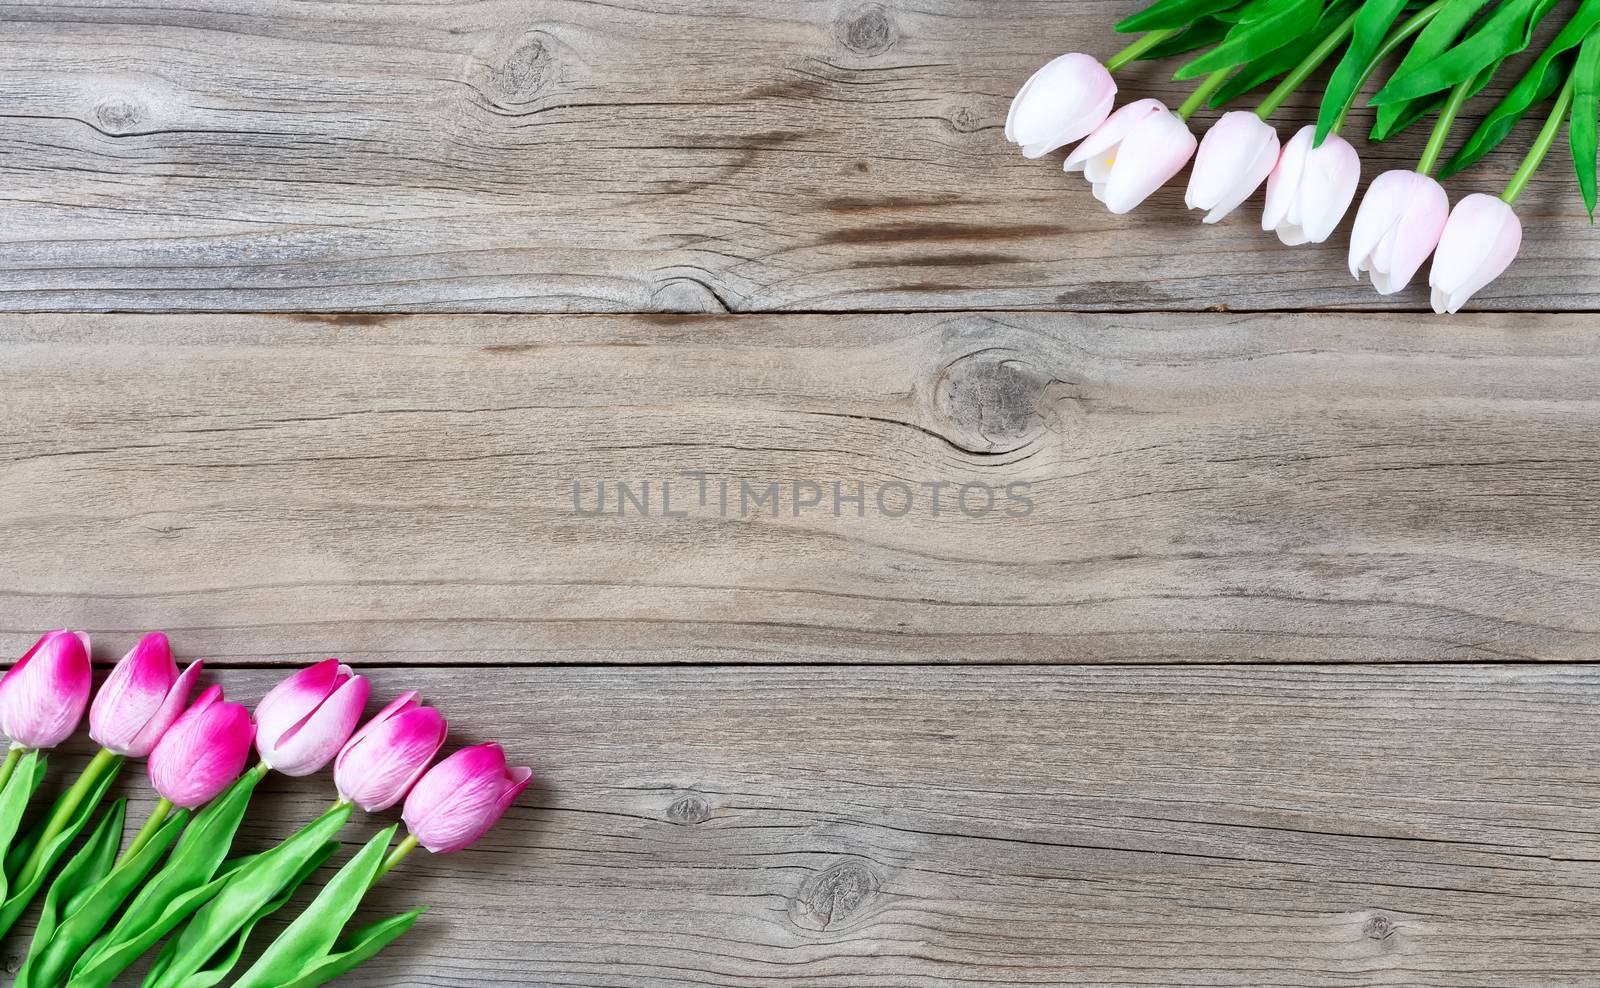 Tulips on rustic wooden boards for Easter Background 